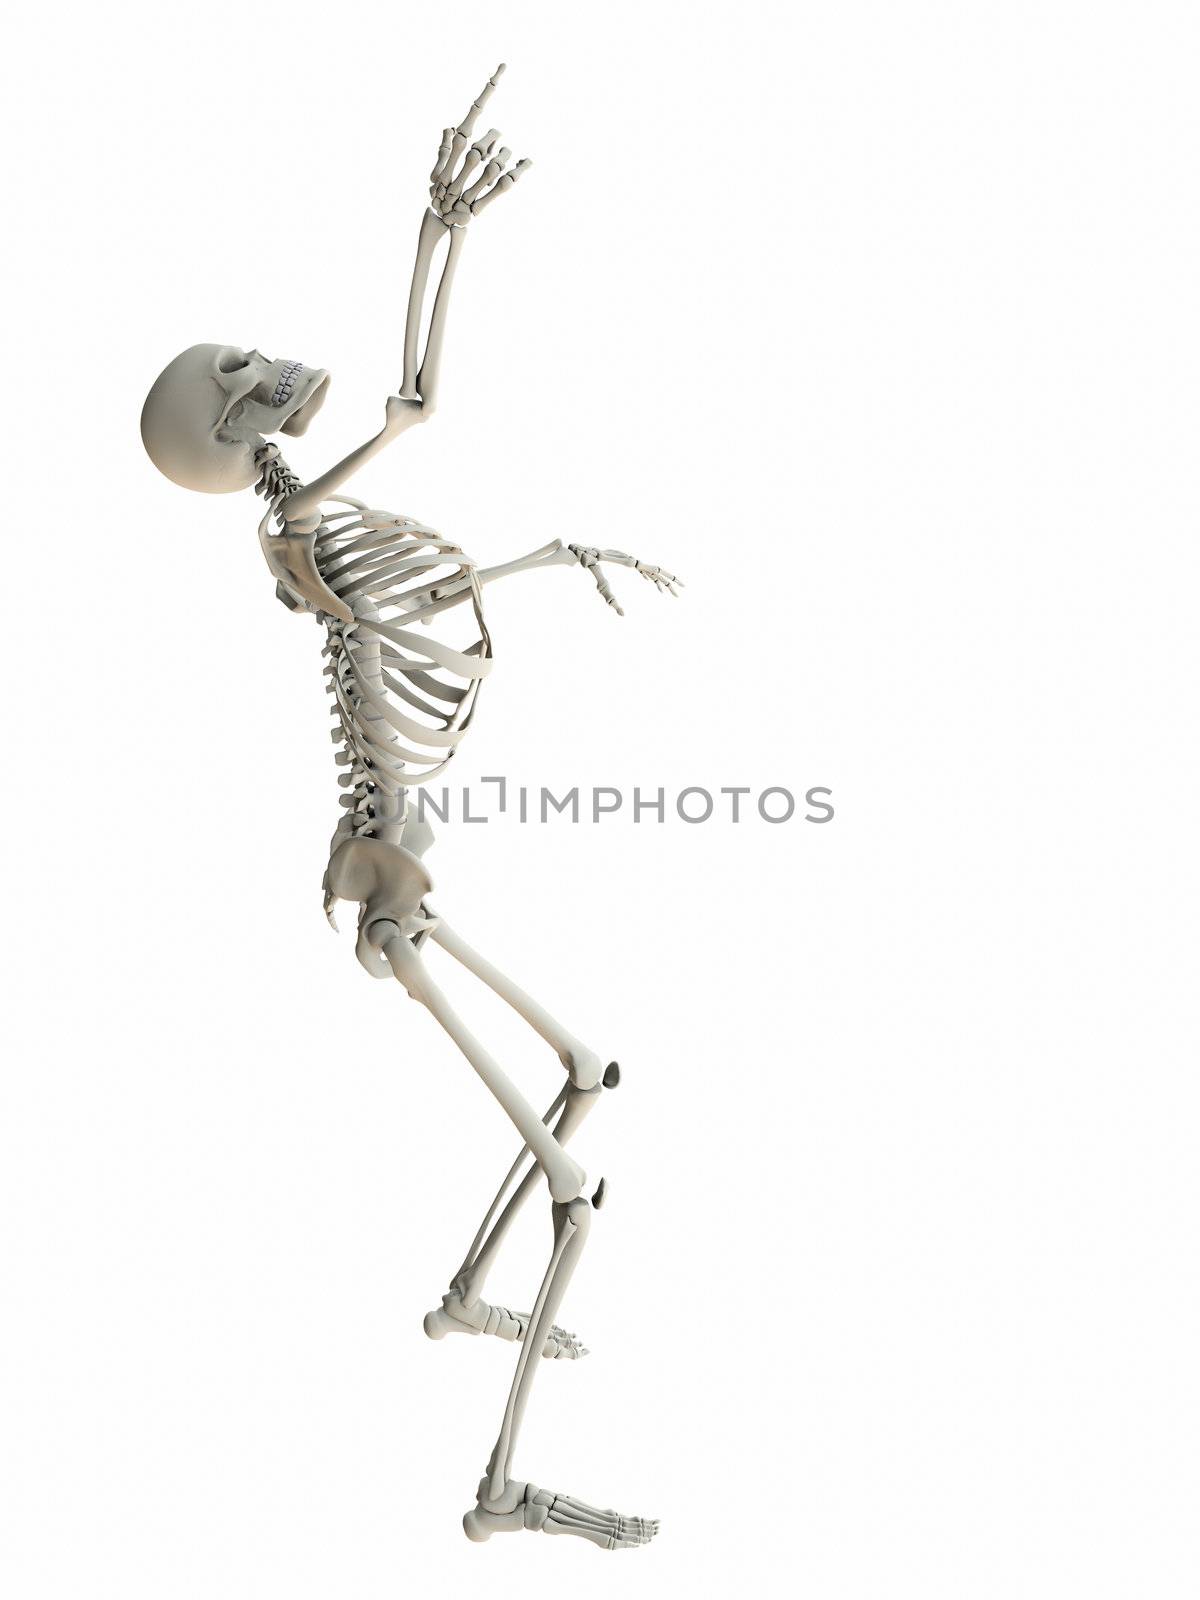 Isolated skeleton standing looking up pointing at white copy space.